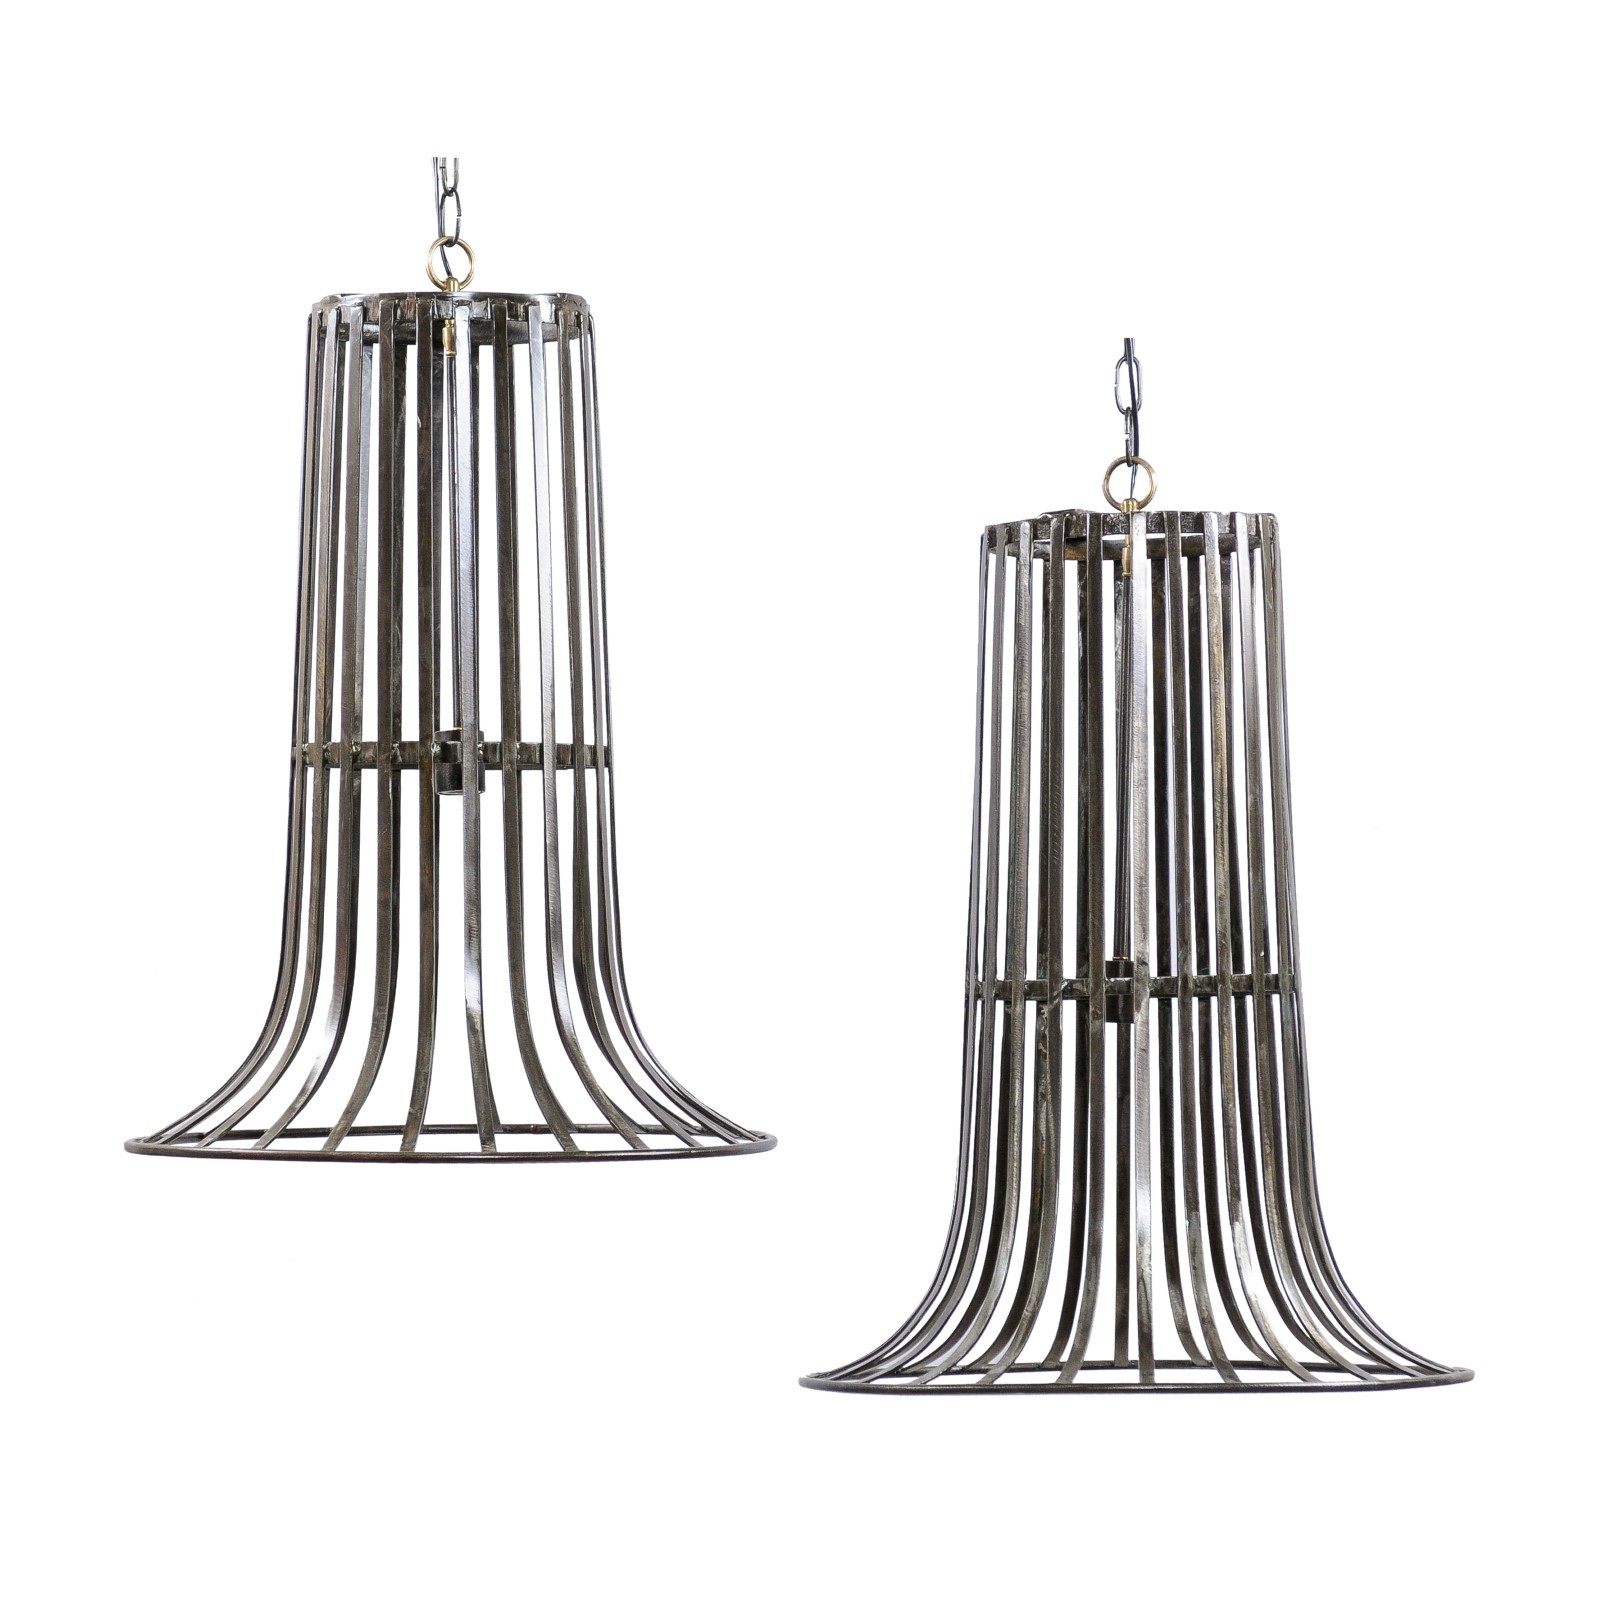 Pair French Tall Iron-Basket Hanging Lights